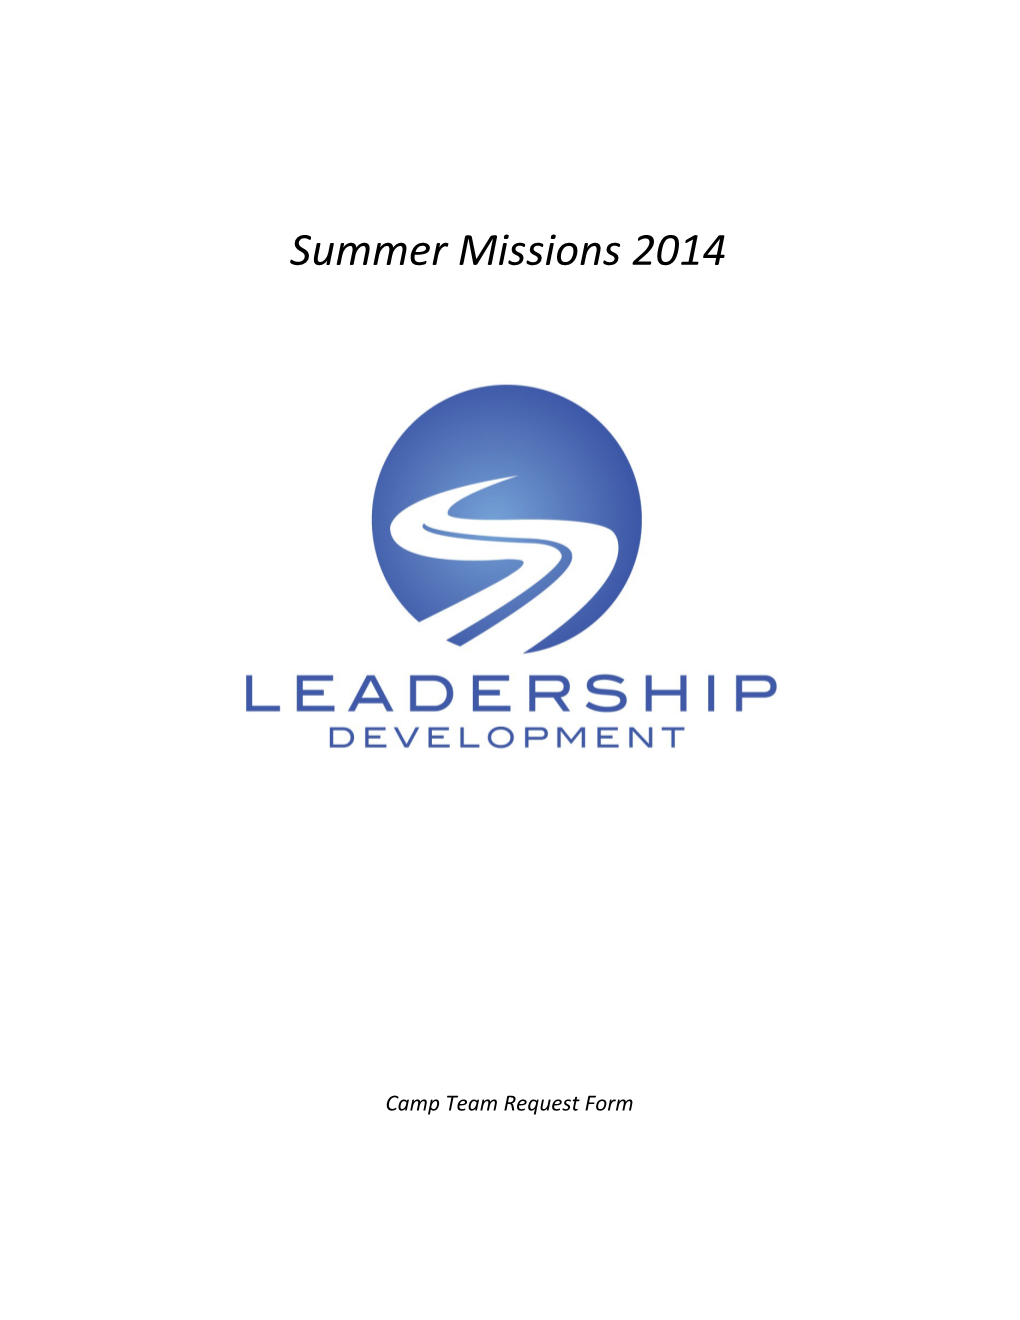 Summer Missions 2014